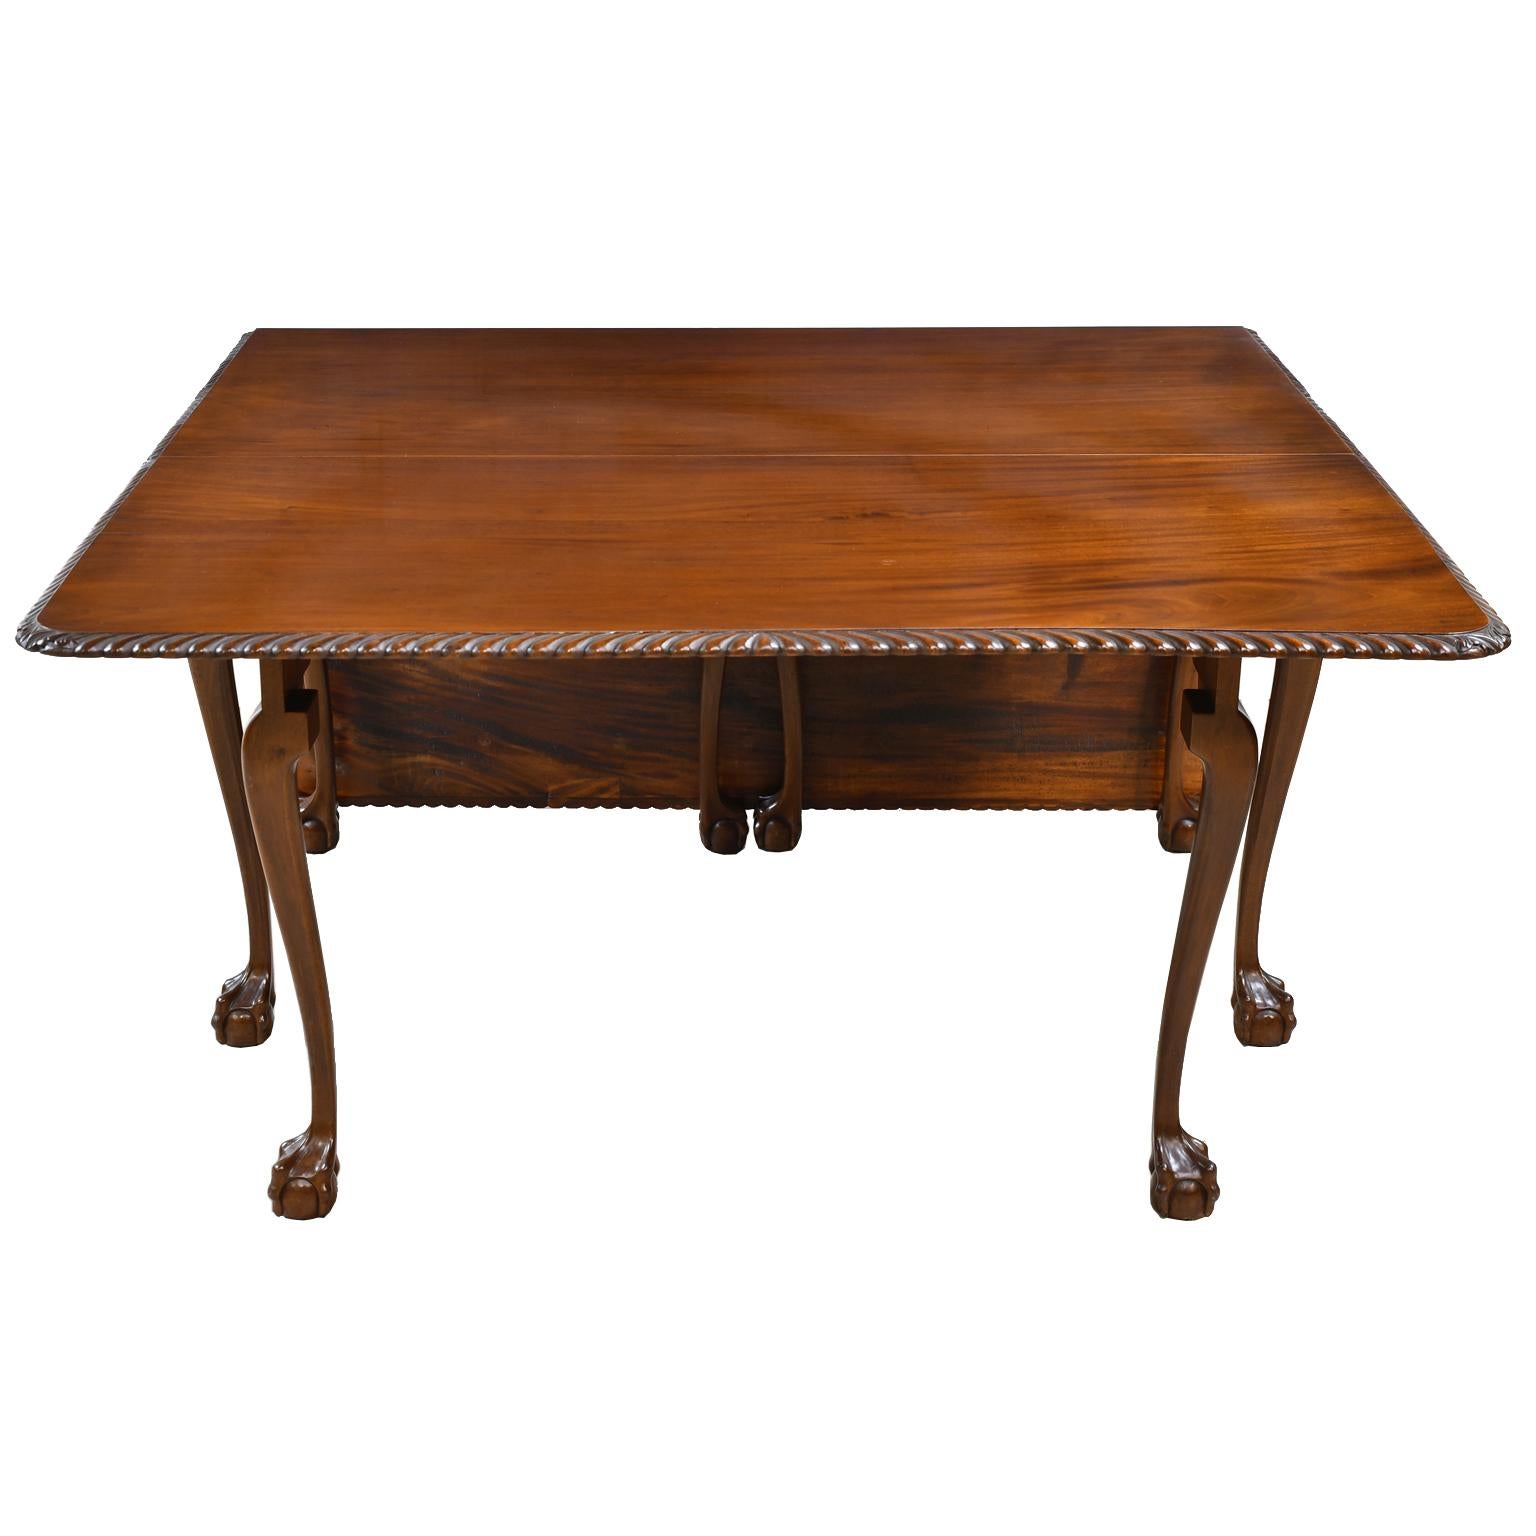 Hand-Crafted Large Centennial Queen Anne-Style Drop-Leaf Dining Table Philadelphia circa 1880 For Sale